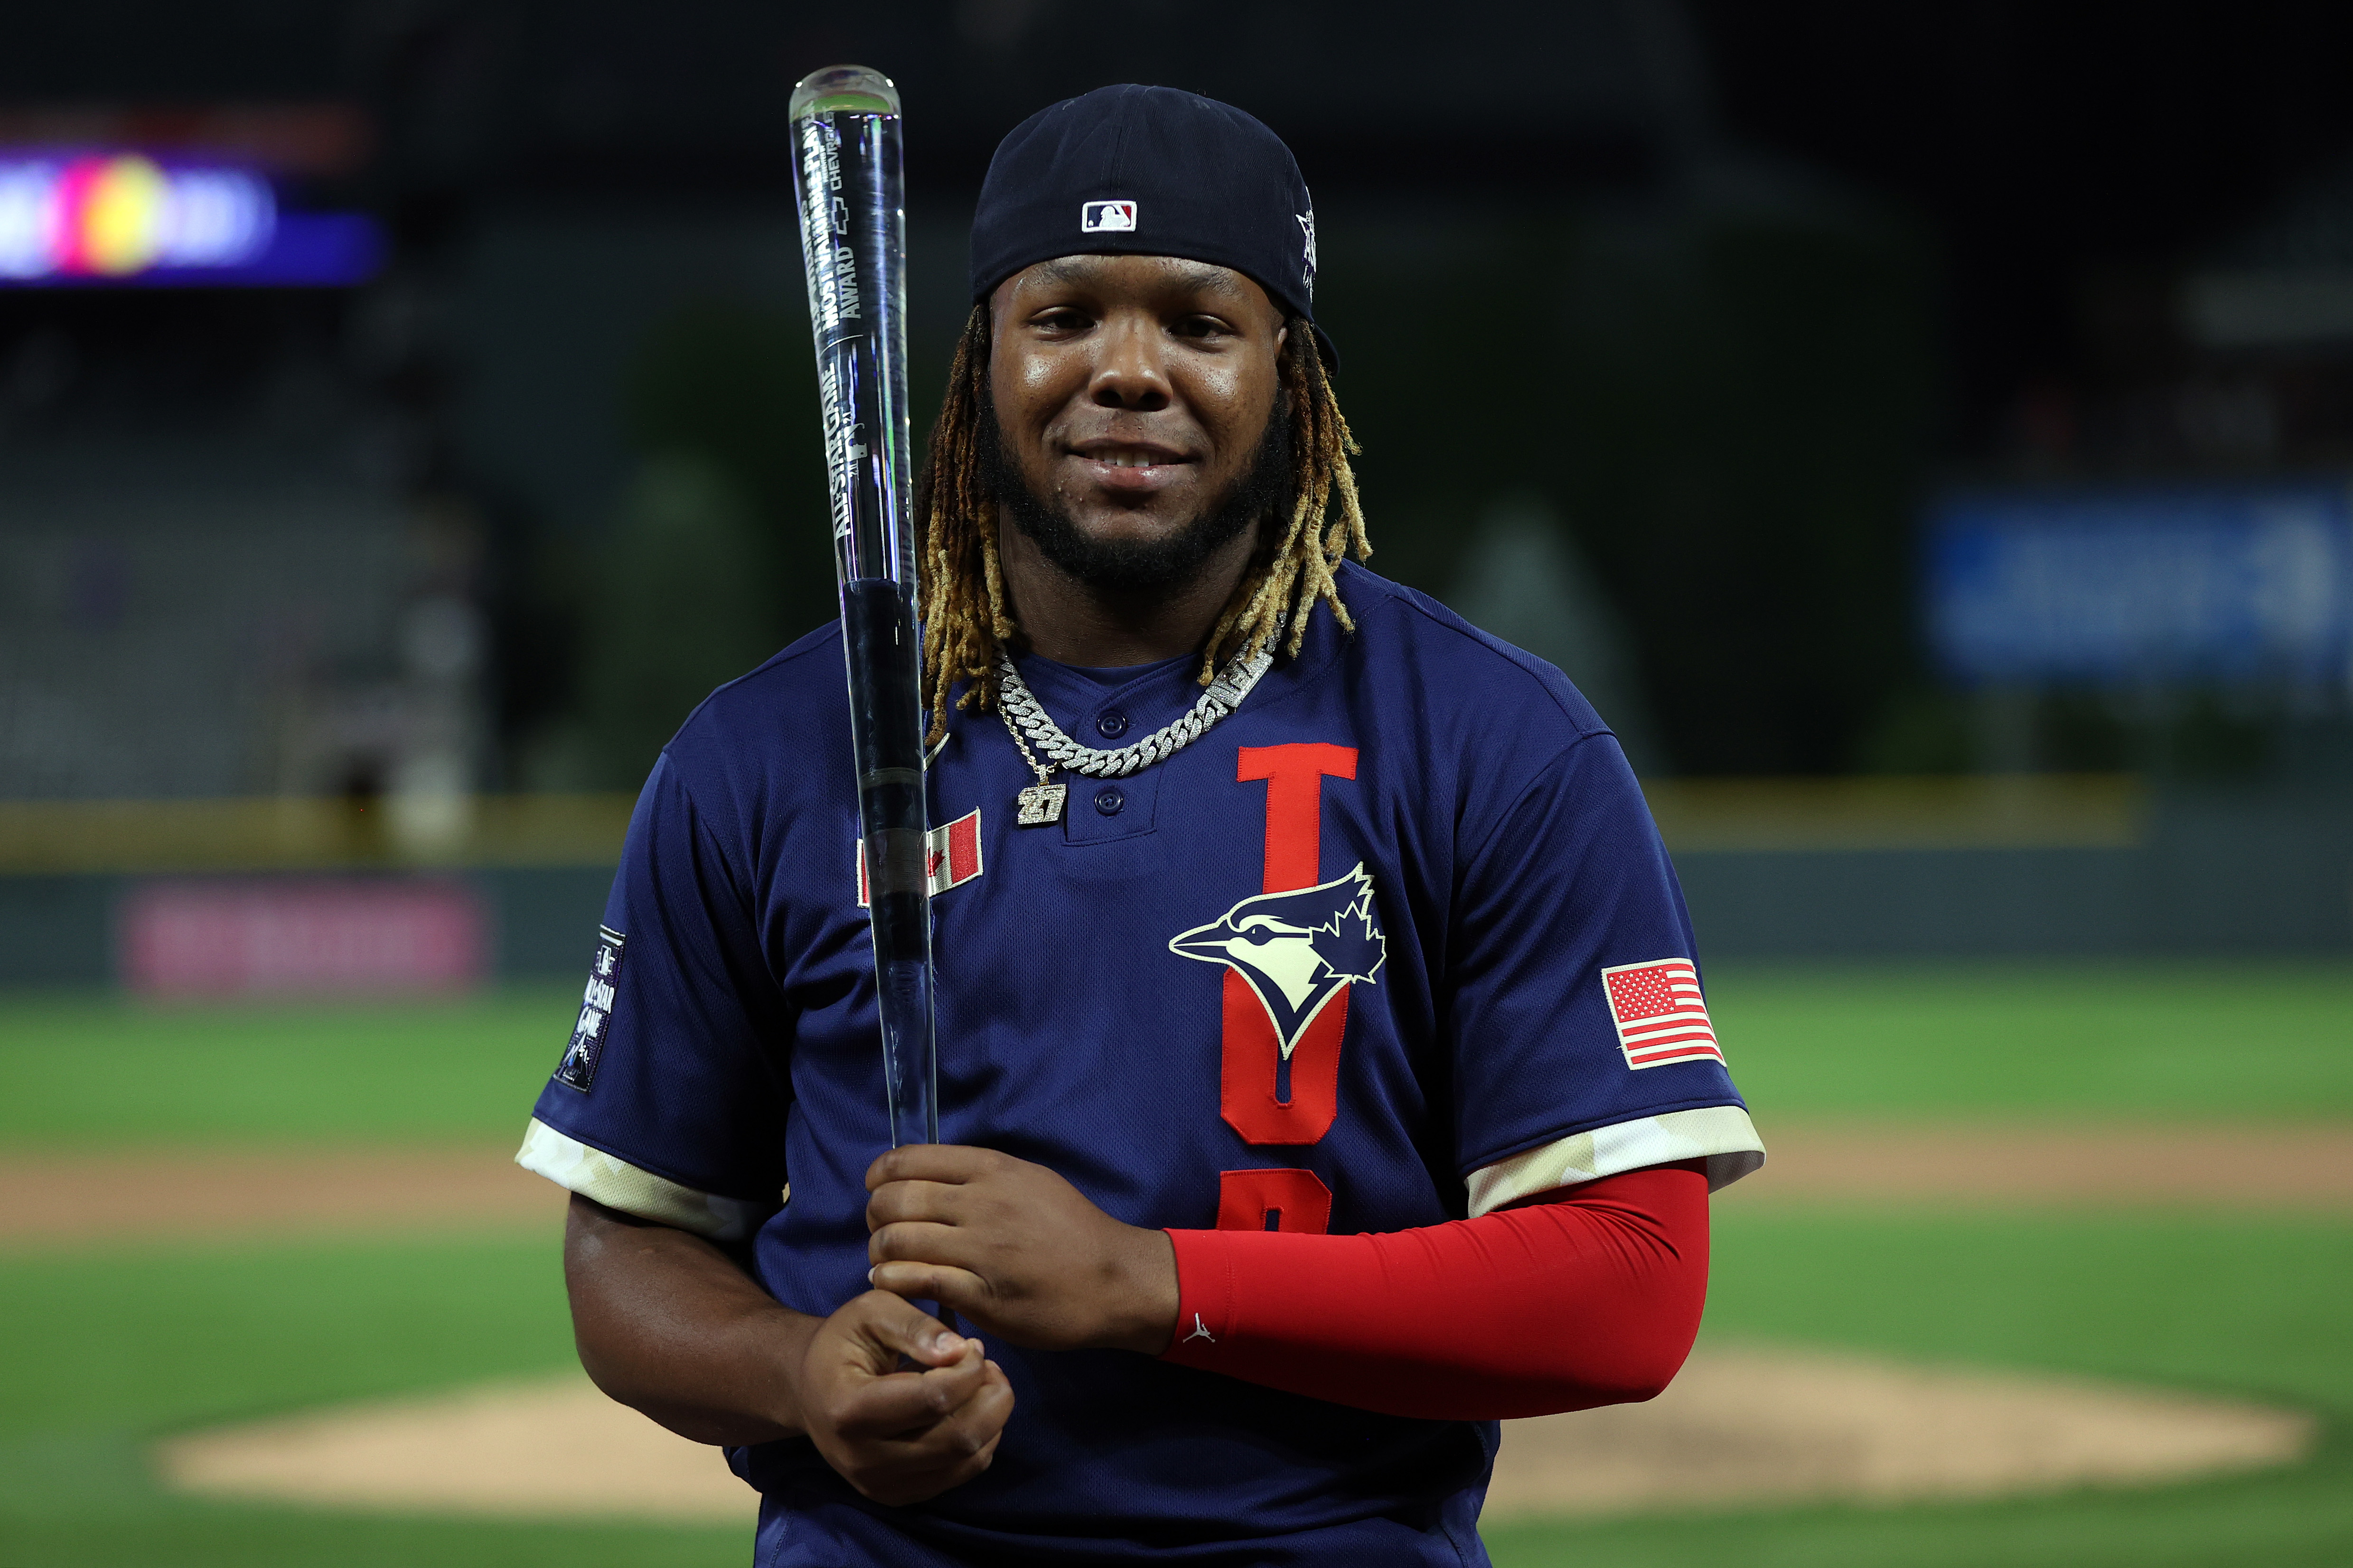 MLB Reveals All-Star Game Jerseys But Fans Still Have One Plea for